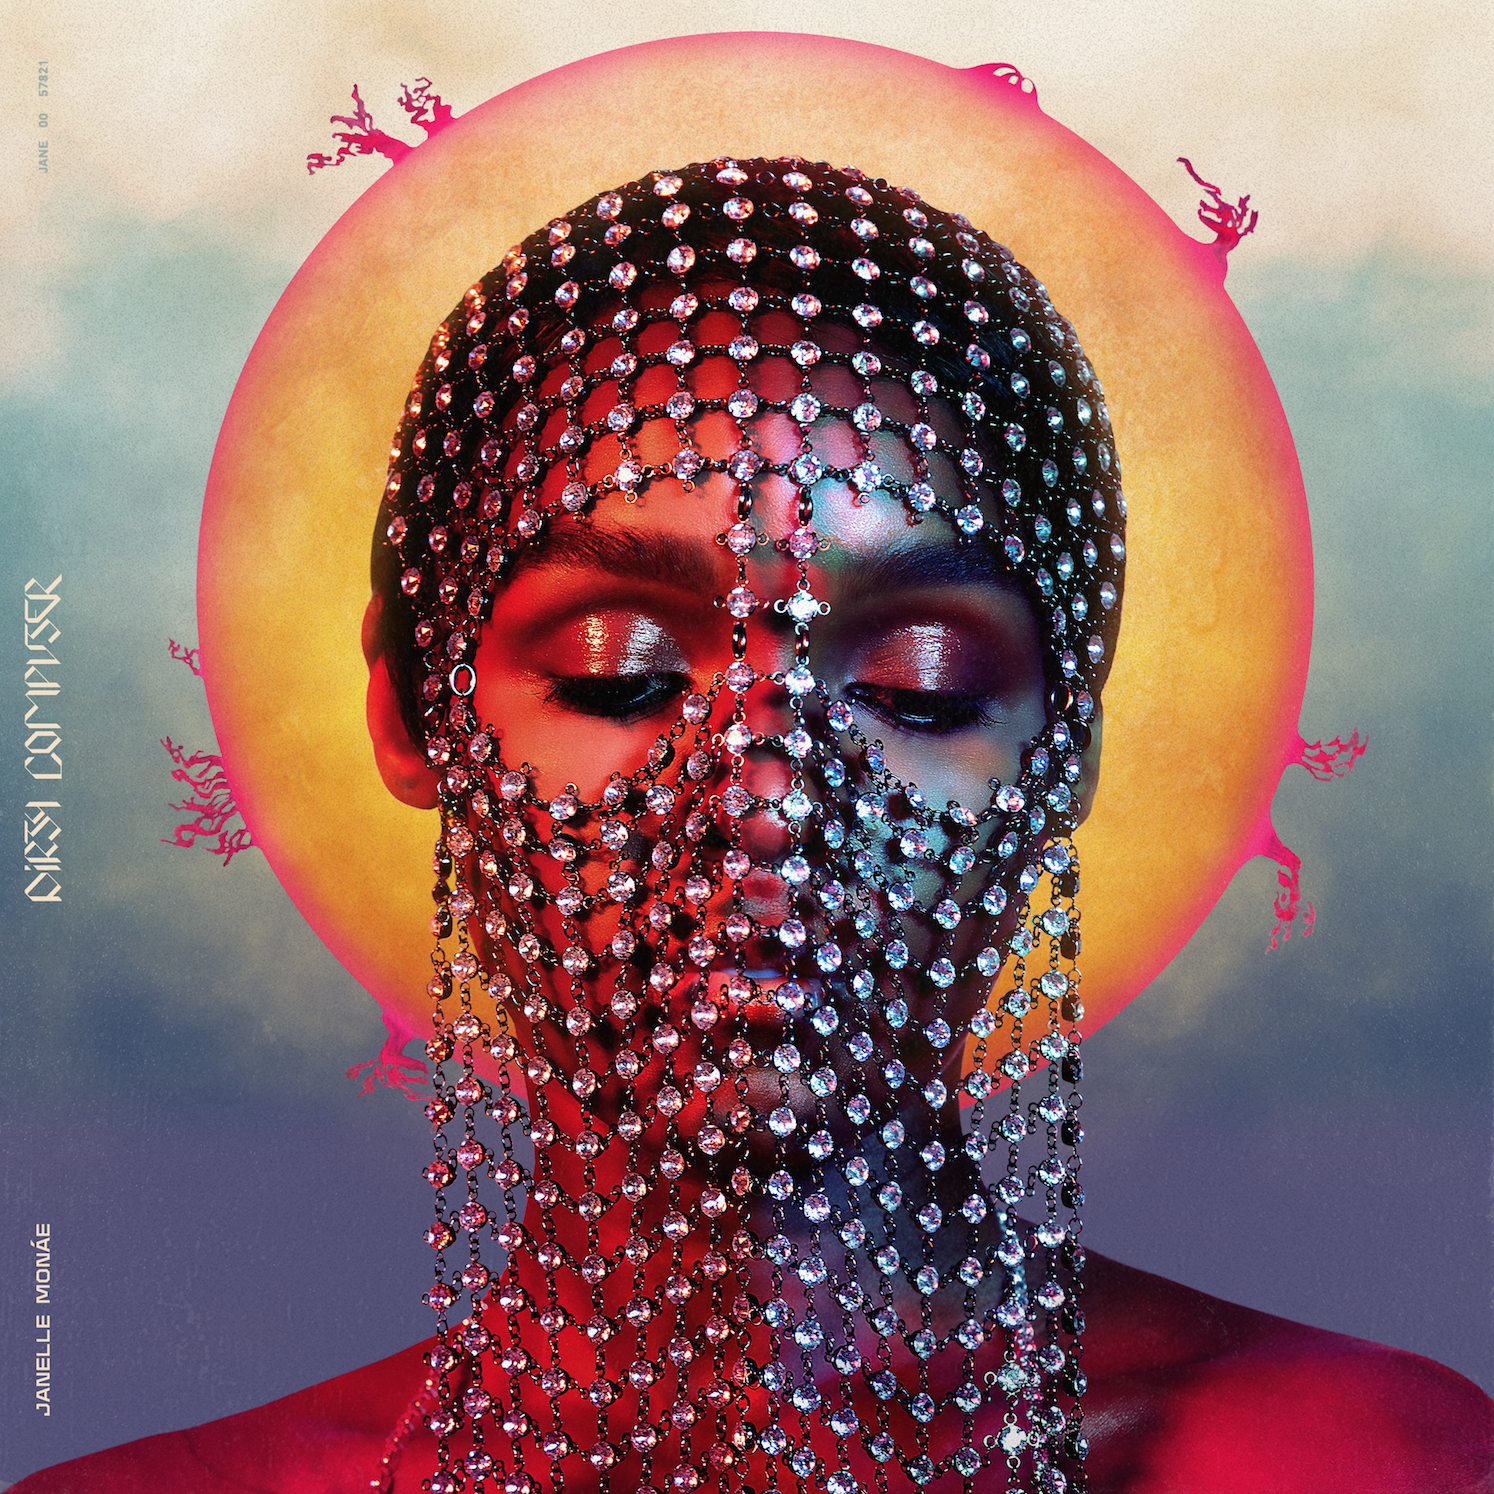 Janelle Monáe Details New Album <i></noscript>Dirty Computer</i>, Releases Videos For “Make Me Feel” and “Django Jane”” title=”Screen-Shot-2018-02-22-at-12.29.32-PM-1519320610″ data-original-id=”279595″ data-adjusted-id=”279595″ class=”sm_size_full_width sm_alignment_center ” data-image-source=”professional” />
<div class=